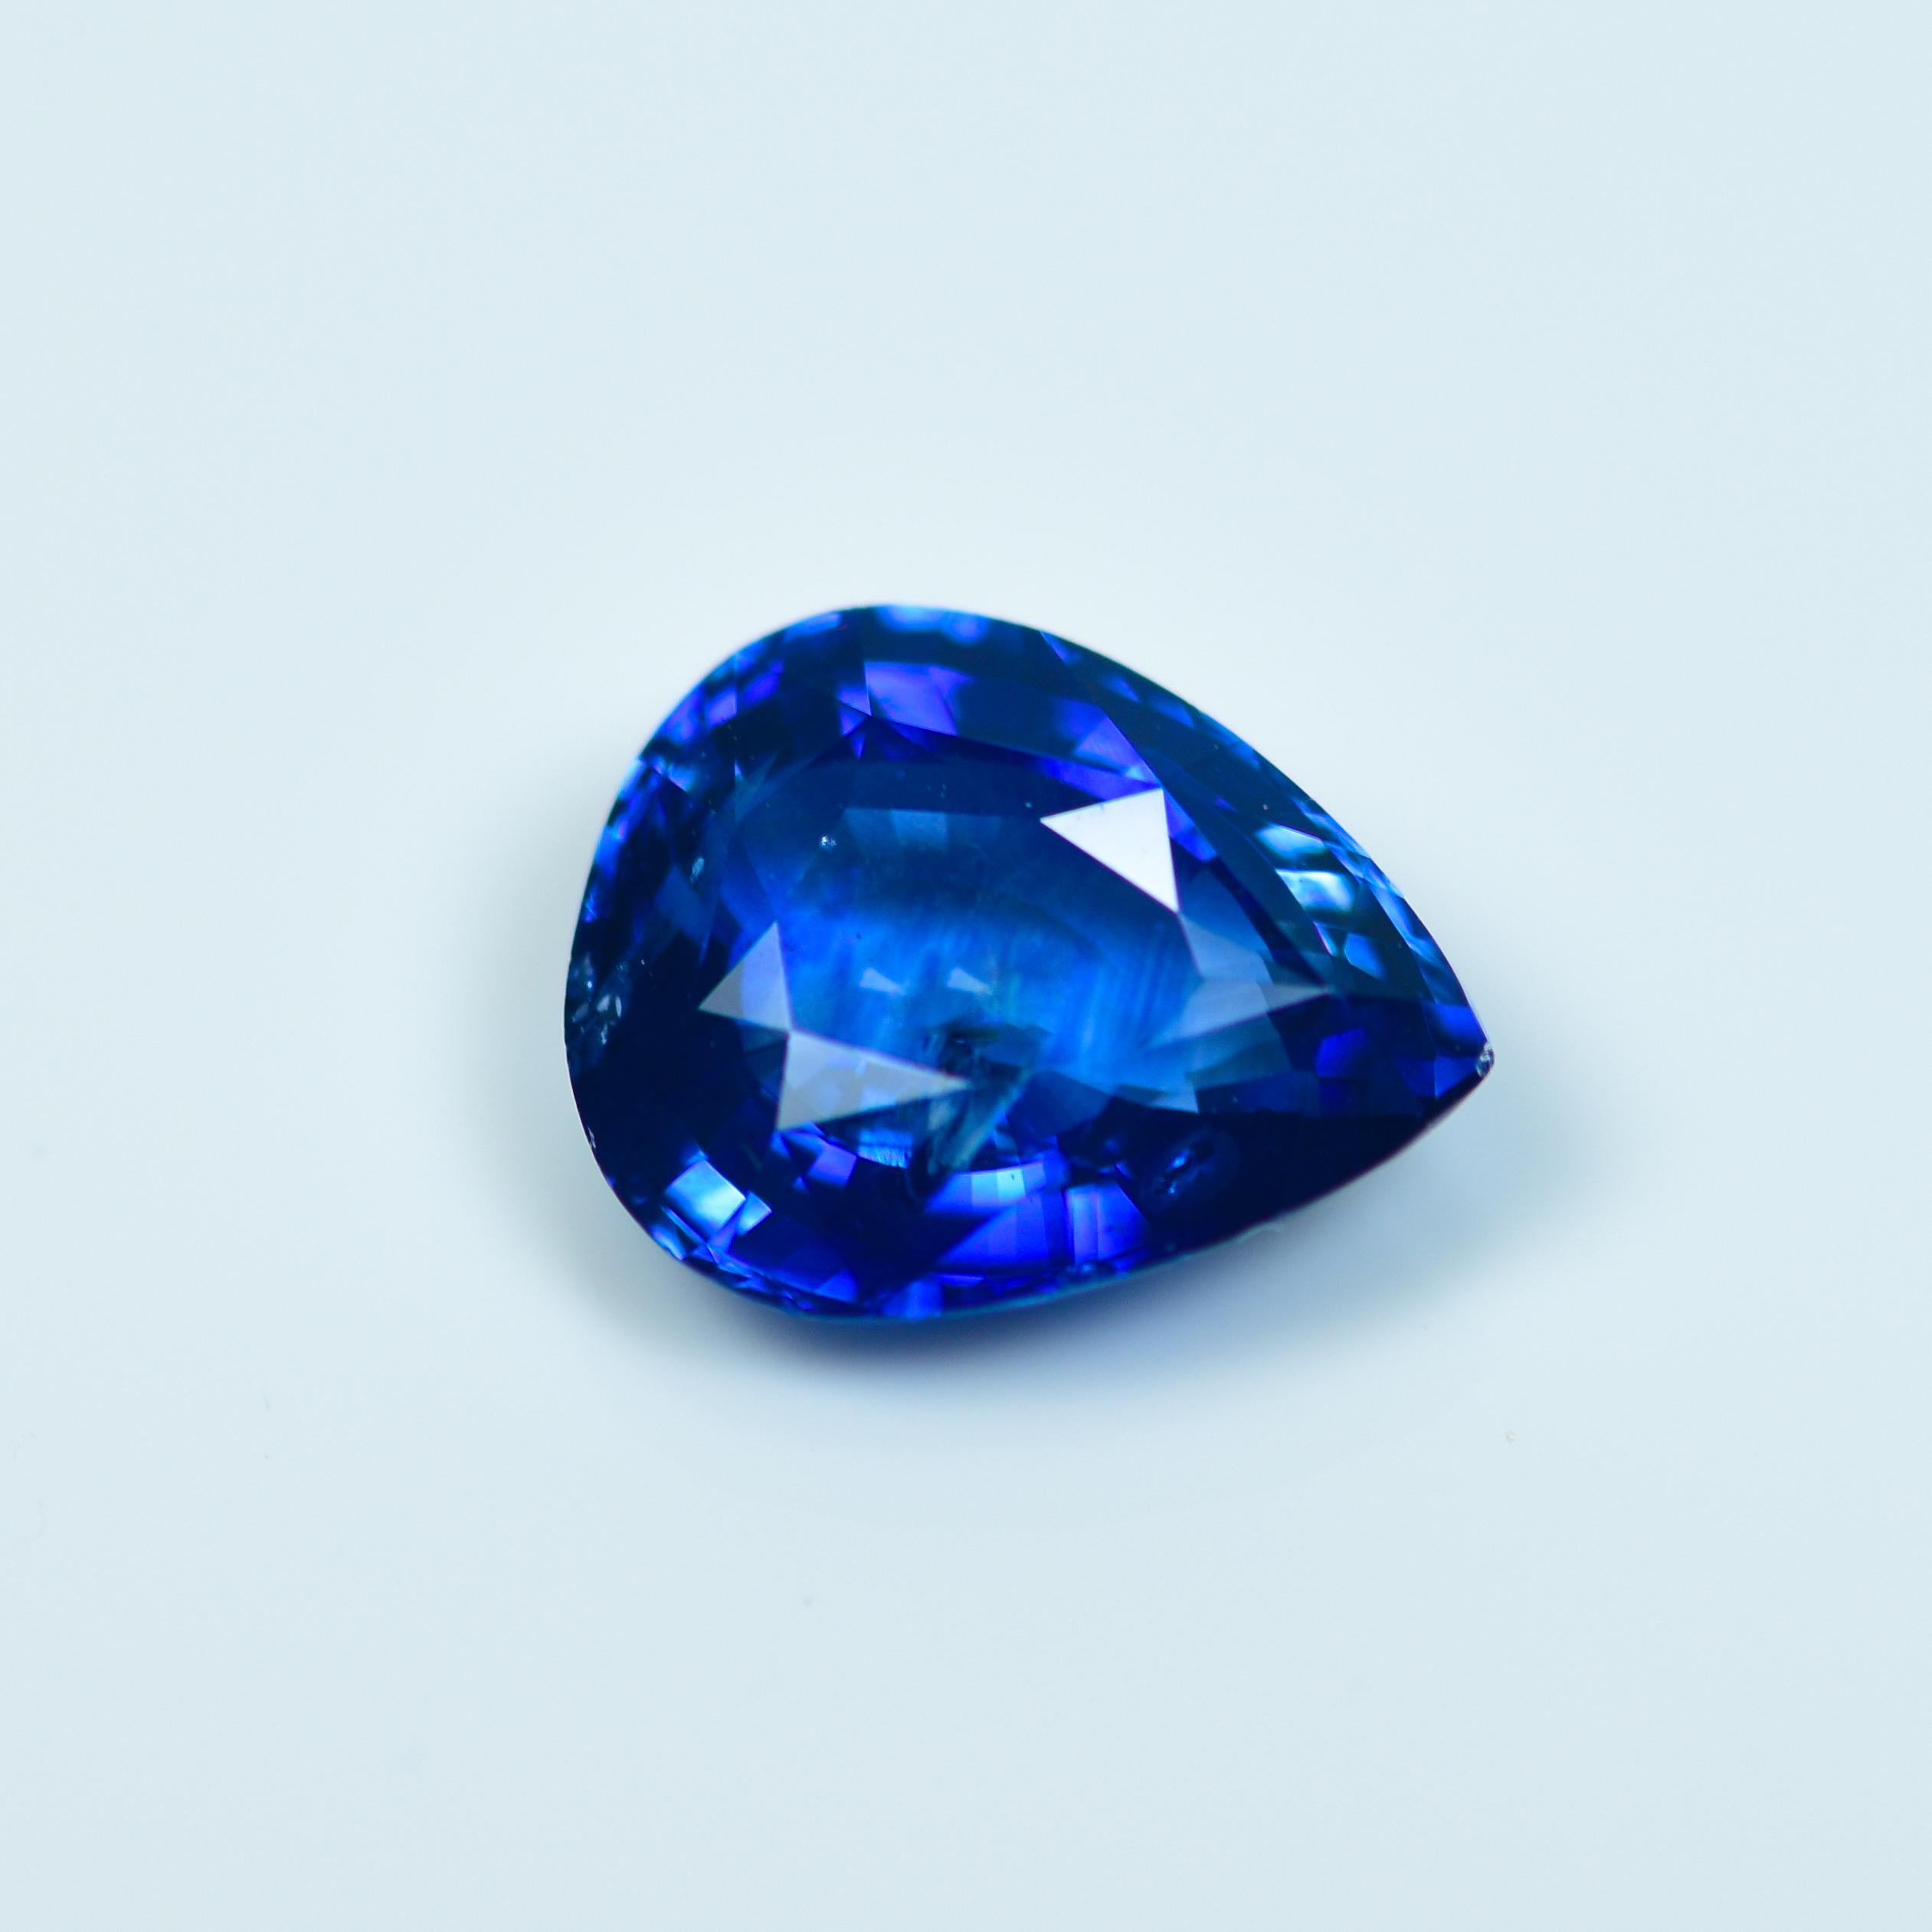 Species : Natural Corundum
Variety : Natural Sapphire
Shape and Cut : Pear Cut
Weight : 4.48 Carat
Measurements : 11.50 x 9.25 x 4.90 mm (Approx.)
Color :  Blue (Royal Blue)
Transparency : Transparent
Treatment : Heated Only

This Beautiful Pear